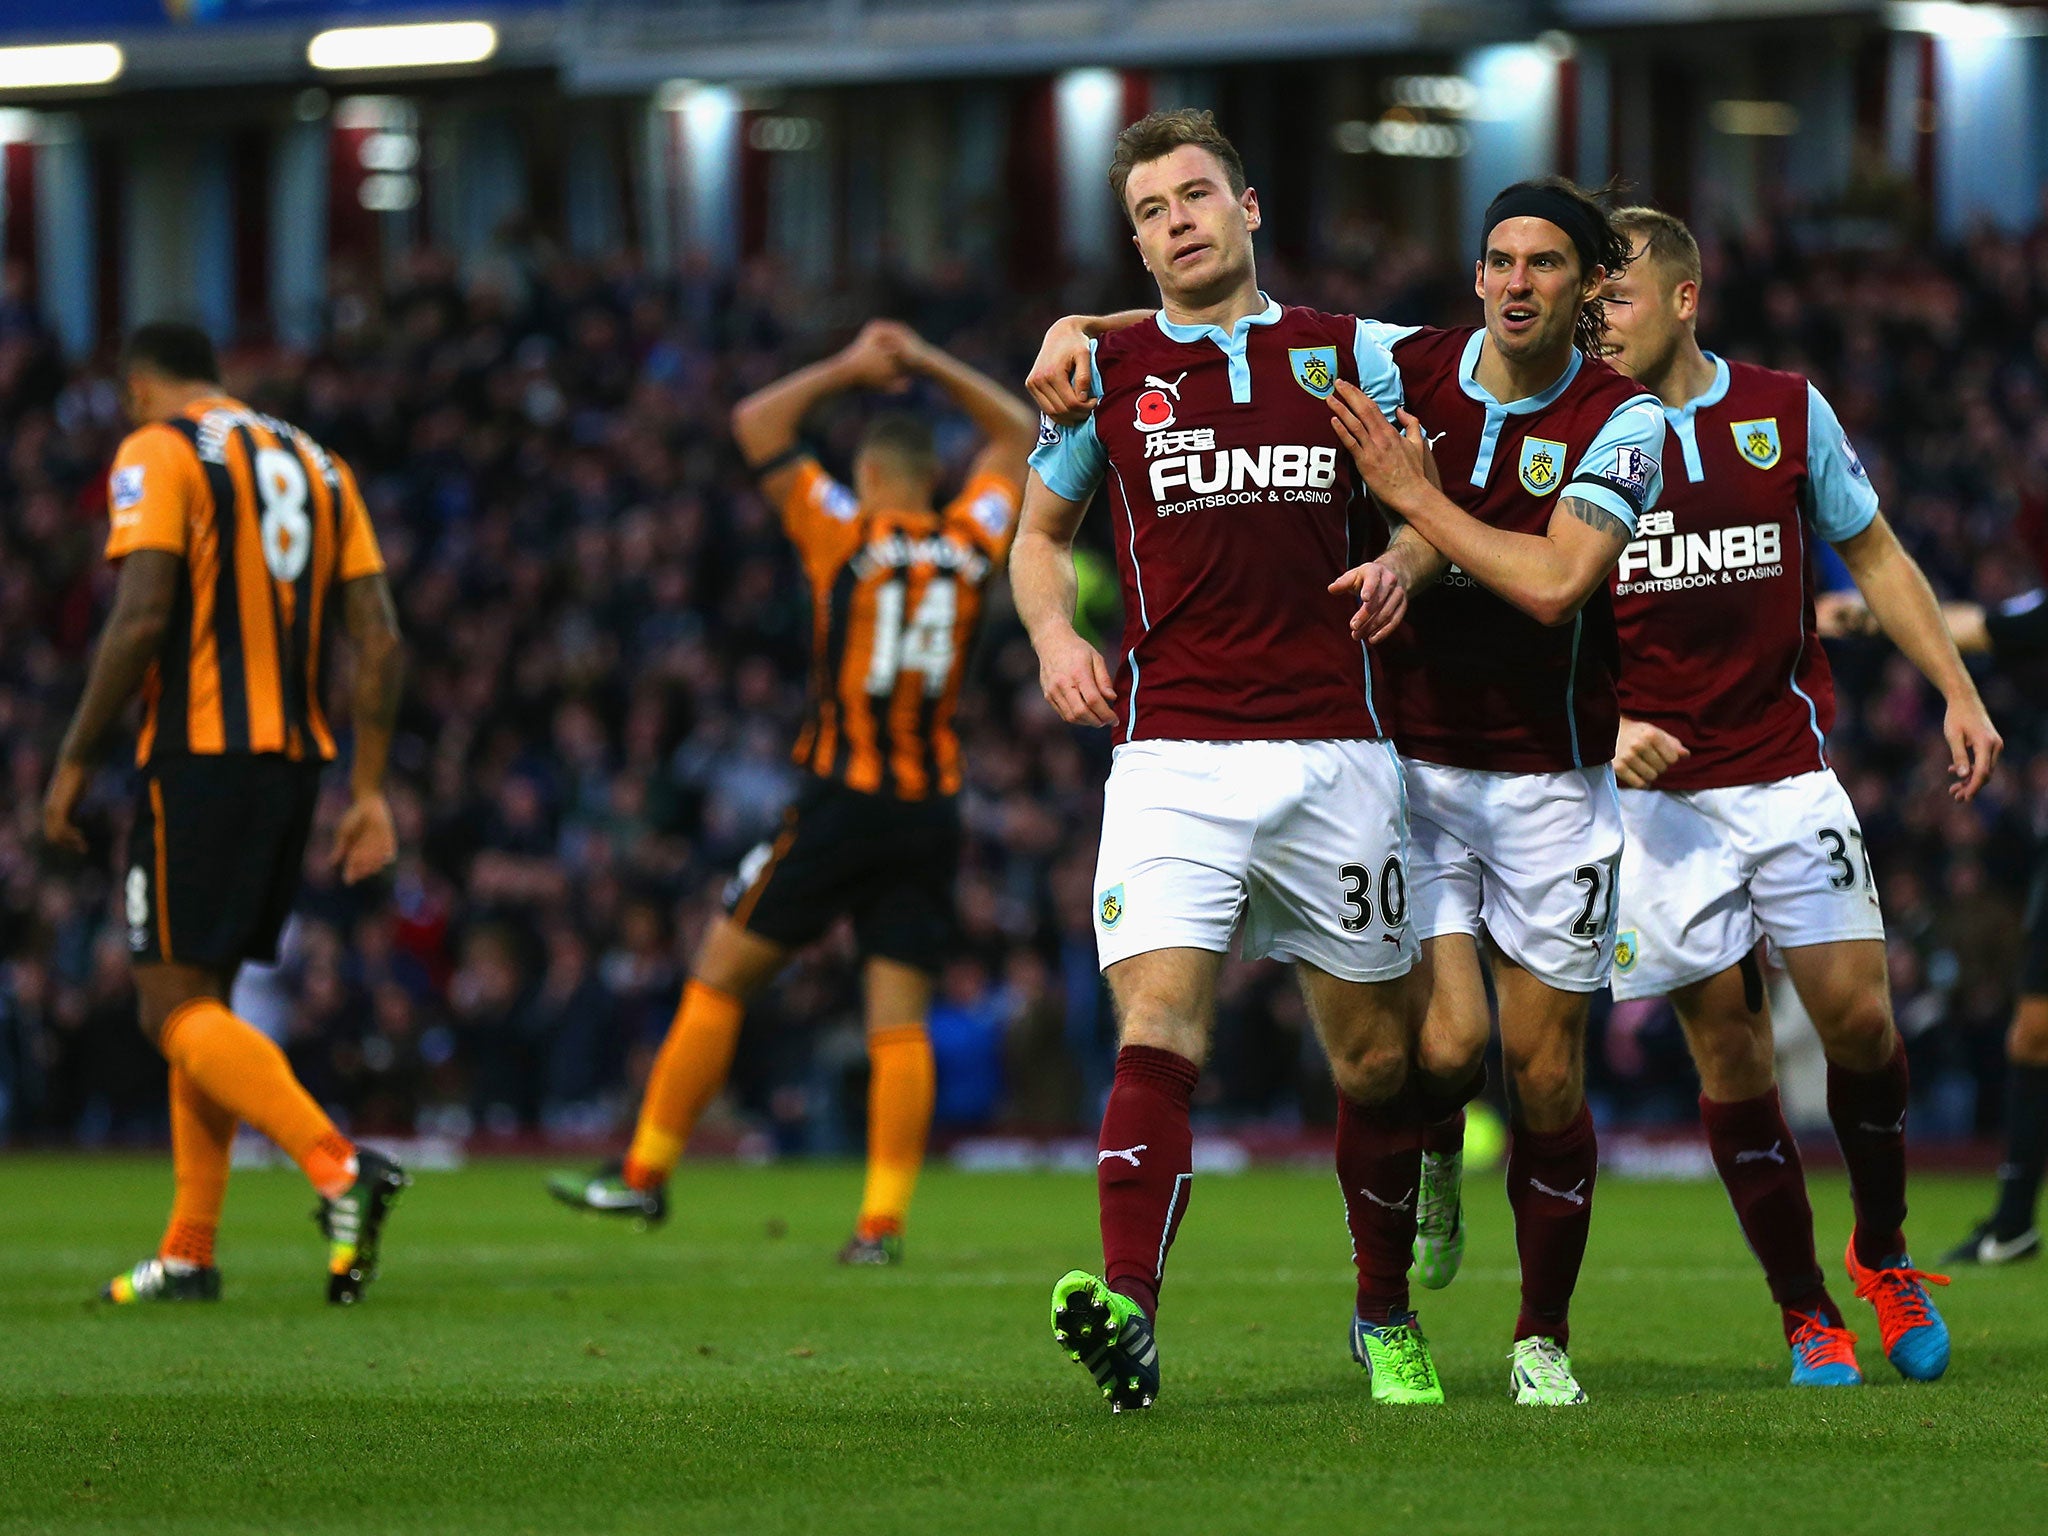 Burnley vs Hull City match report Ashley Barnes clinches Clarets first win back in top flight The Independent The Independent